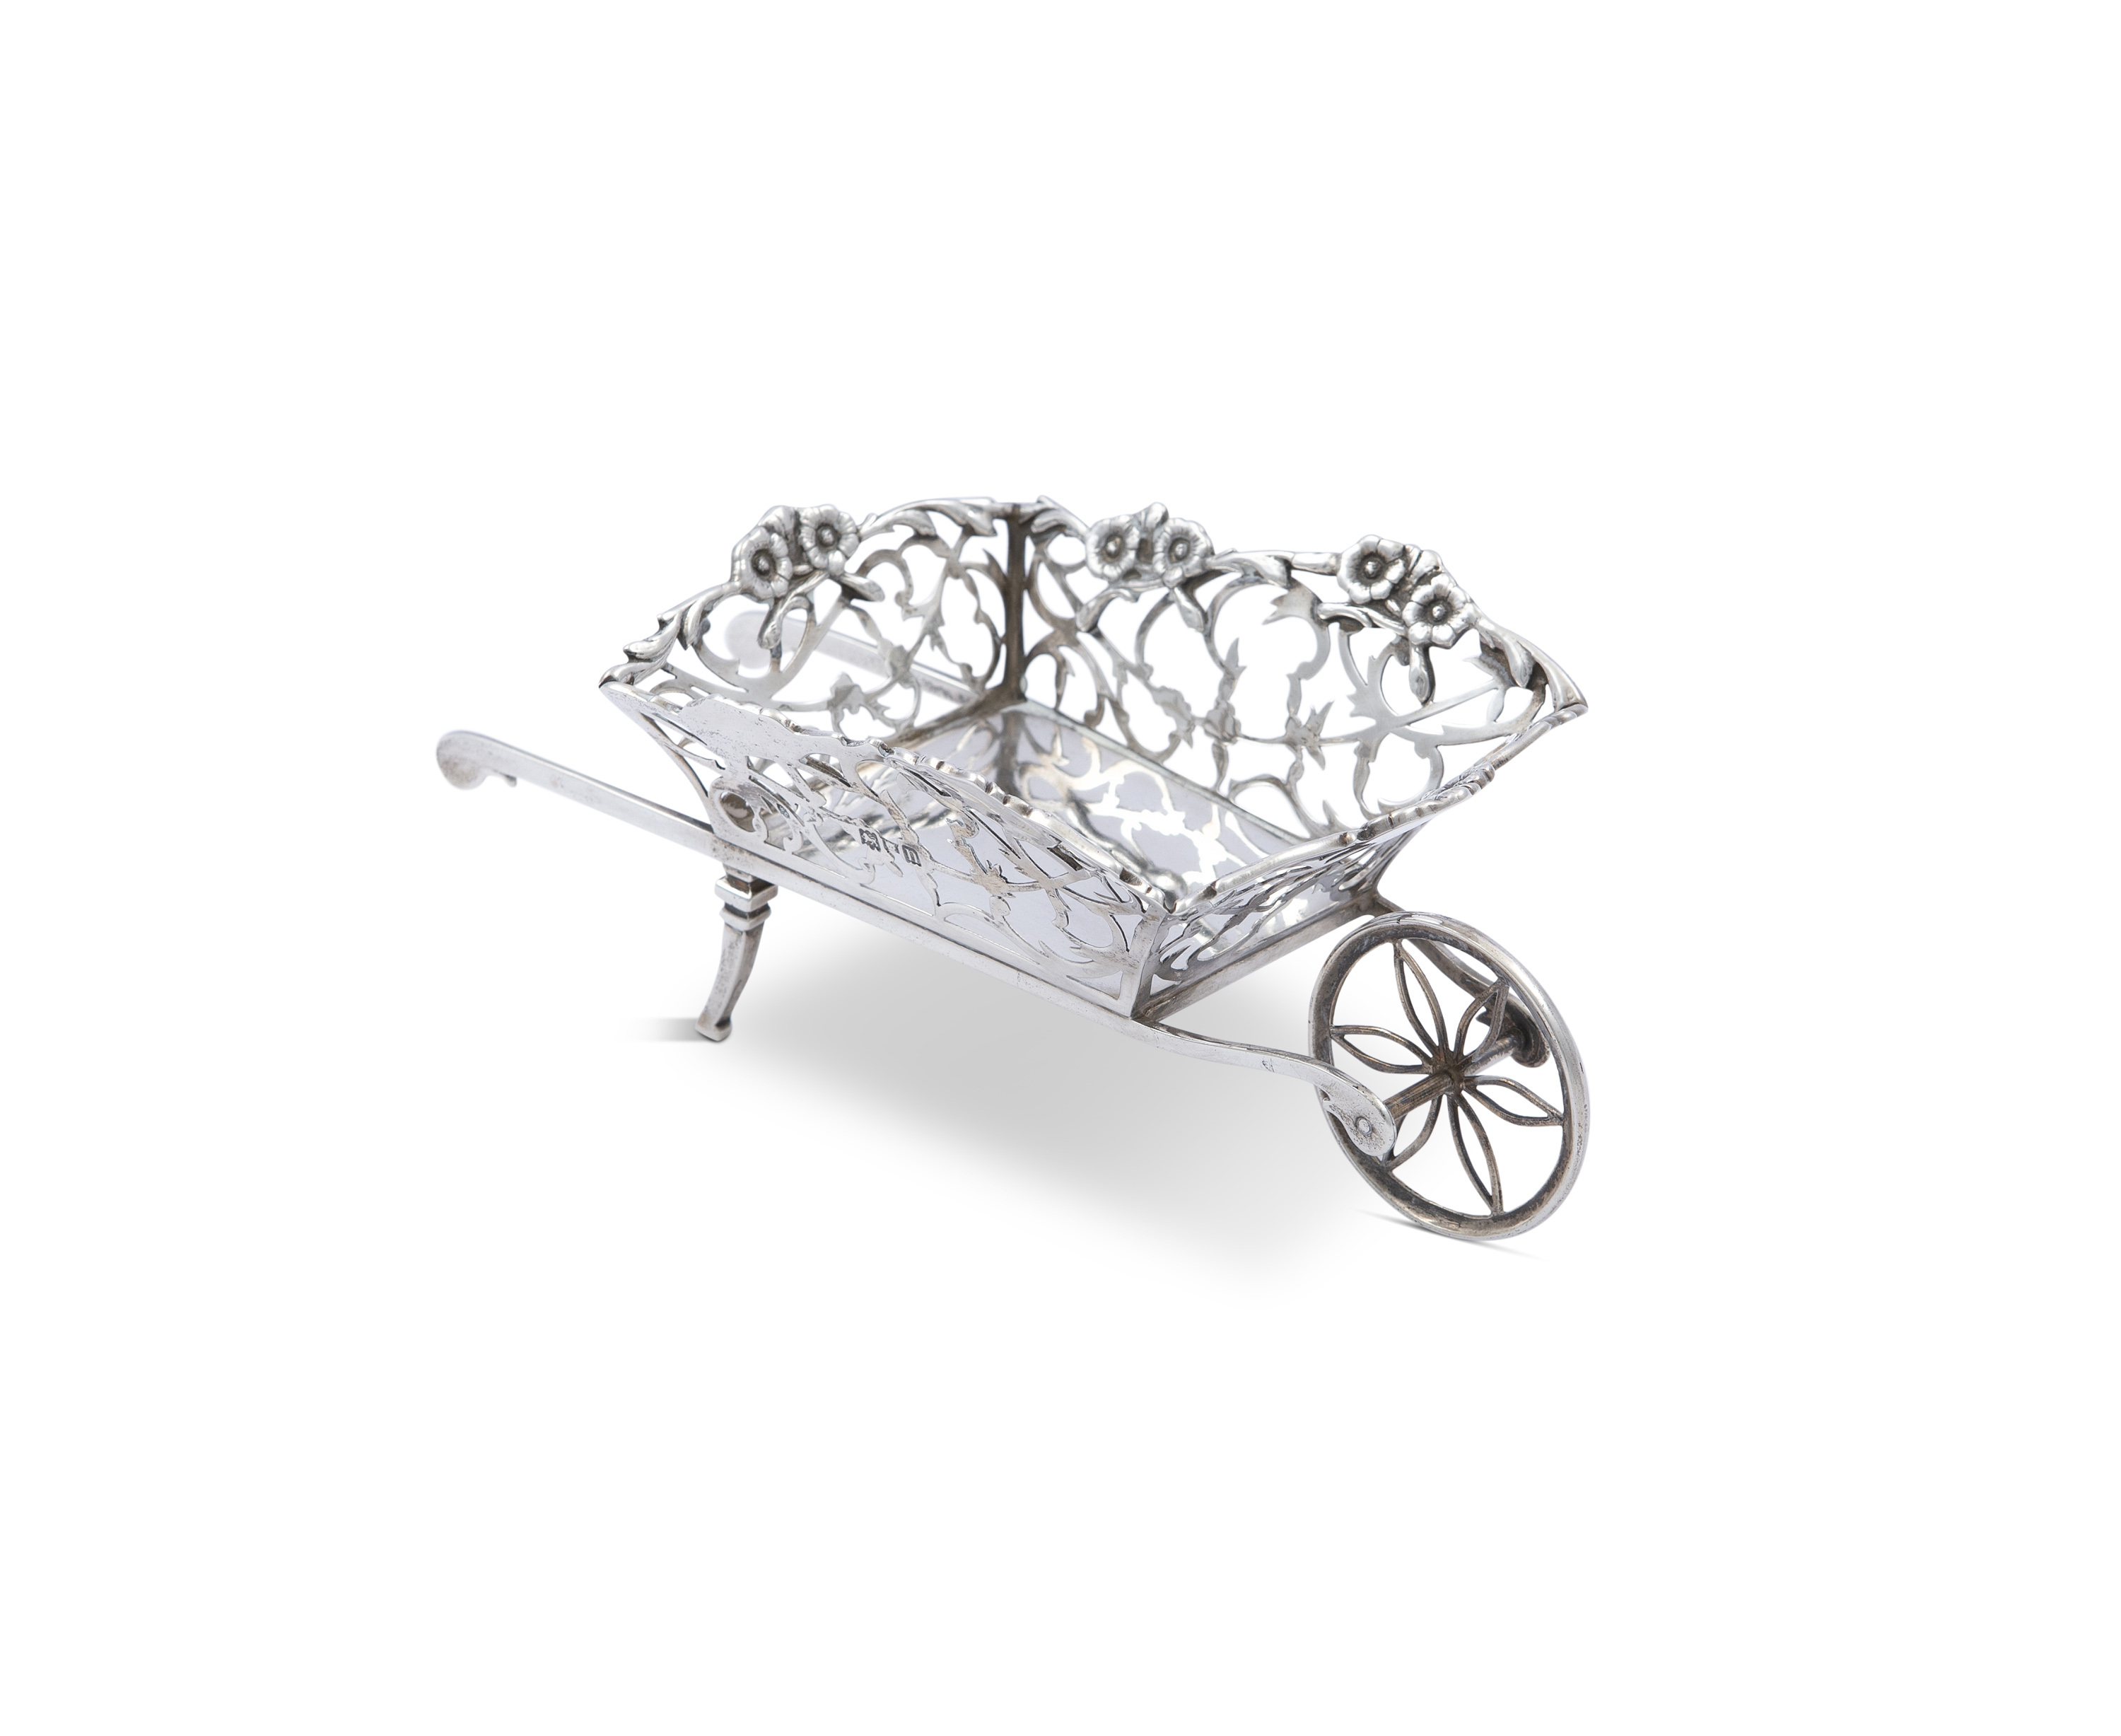 A NOVELTY SILVER BON-BON DISH IN THE FORM OF A WHEEL BARROW, London 1907, mark of William Comyns, - Image 2 of 2